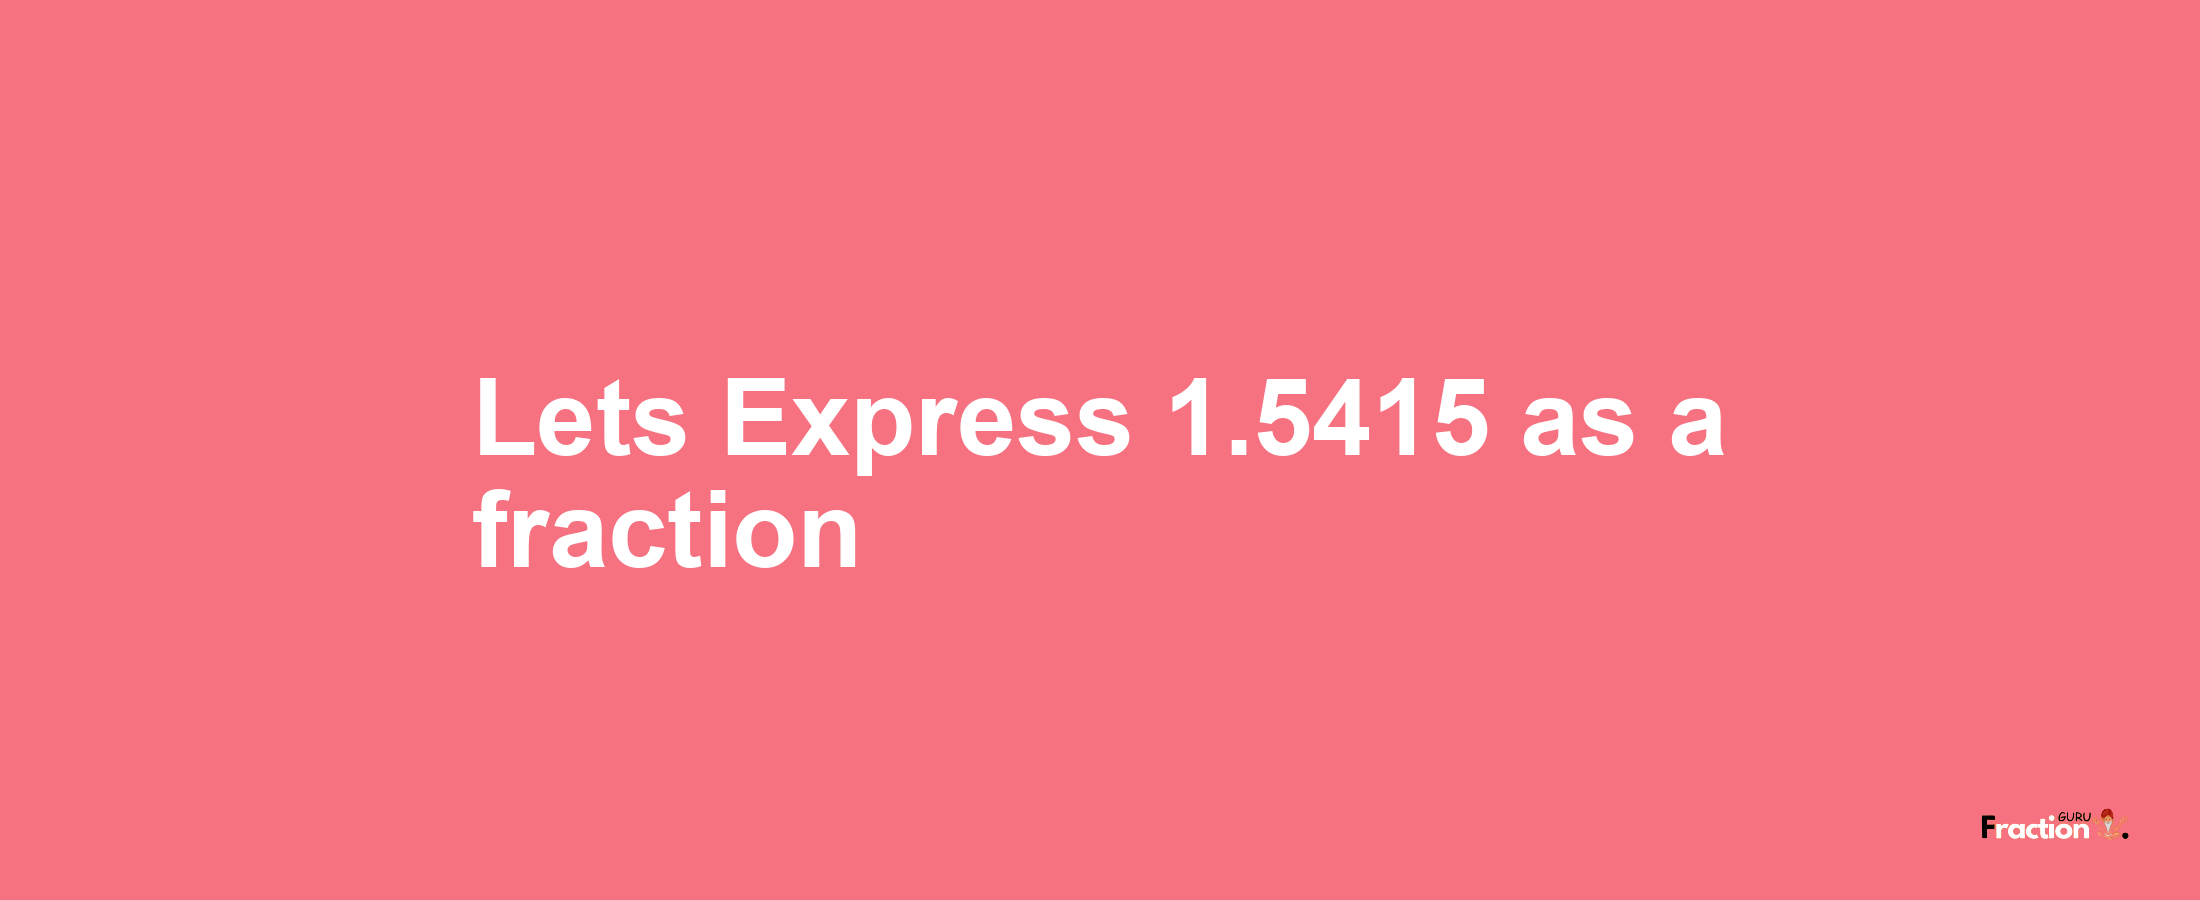 Lets Express 1.5415 as afraction